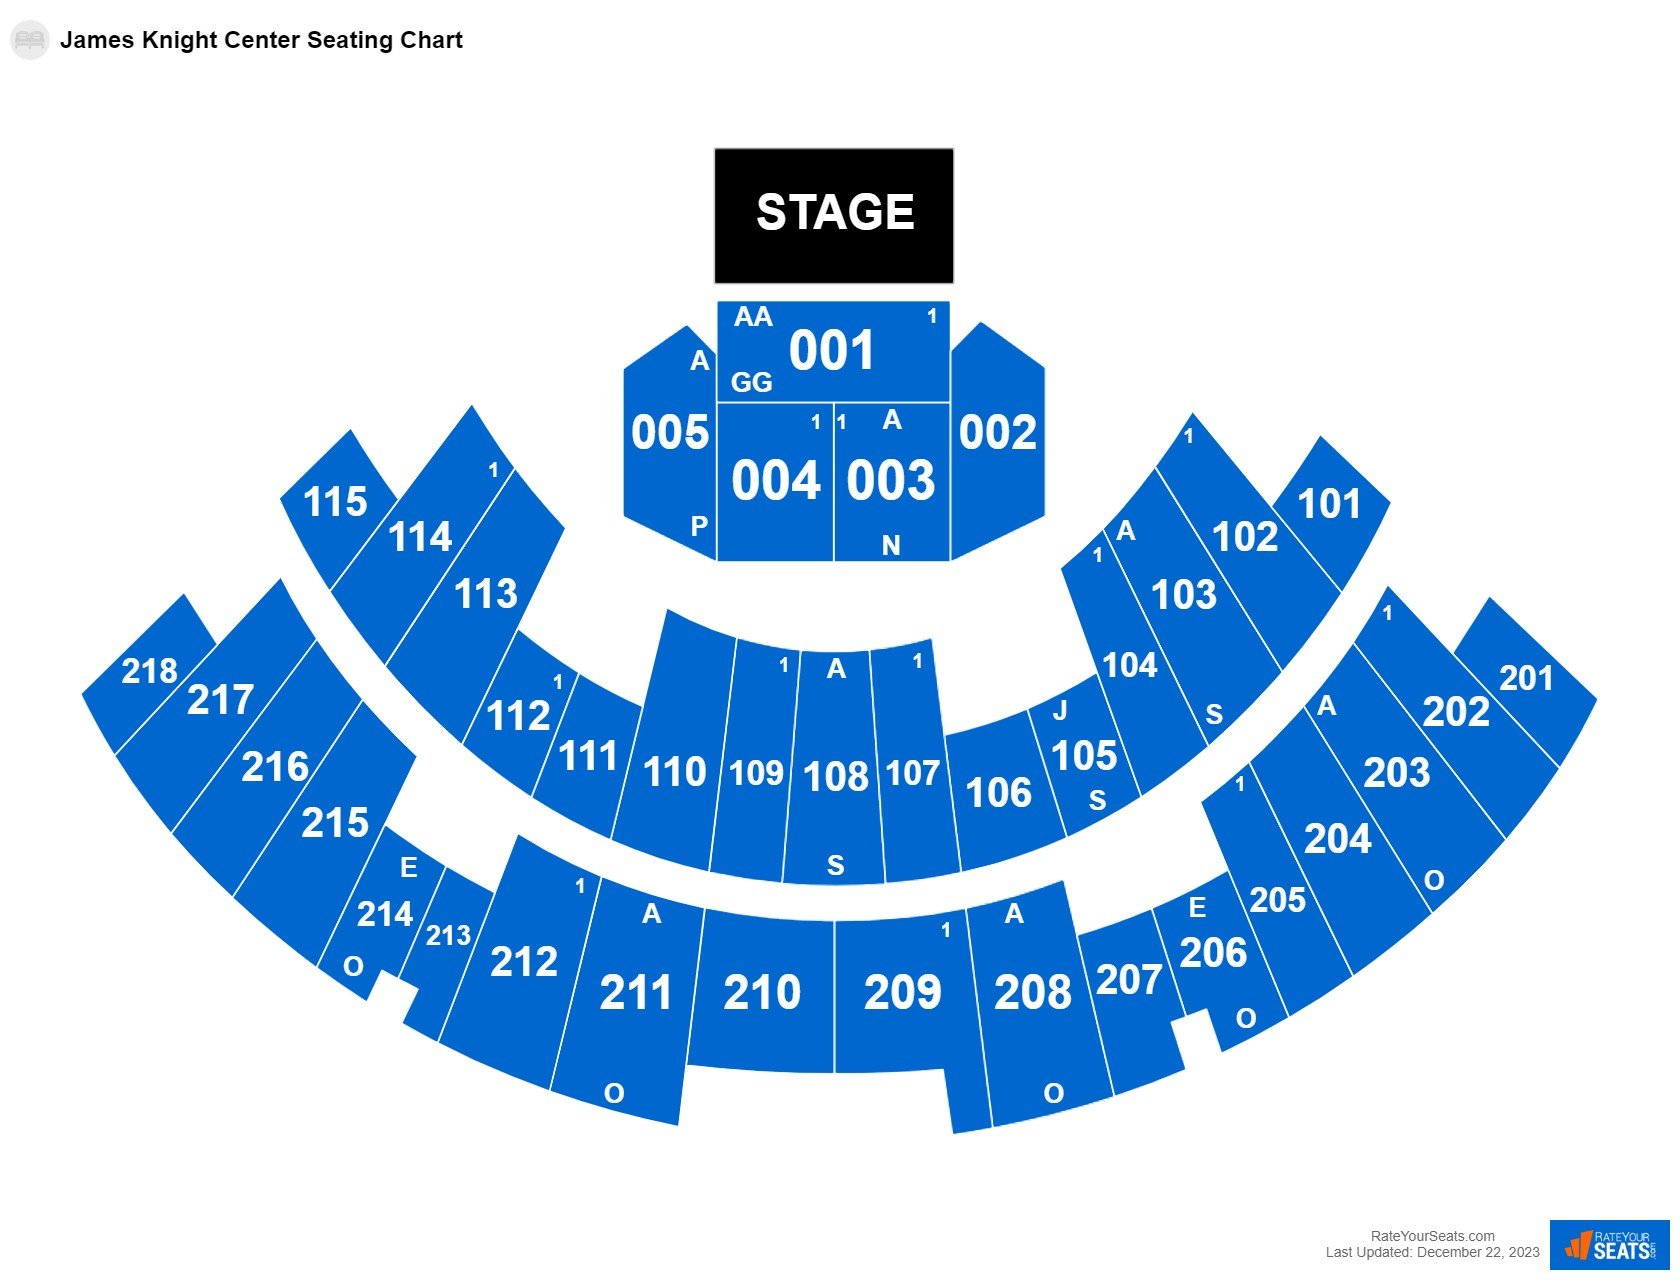 Concert seating chart at James Knight Center